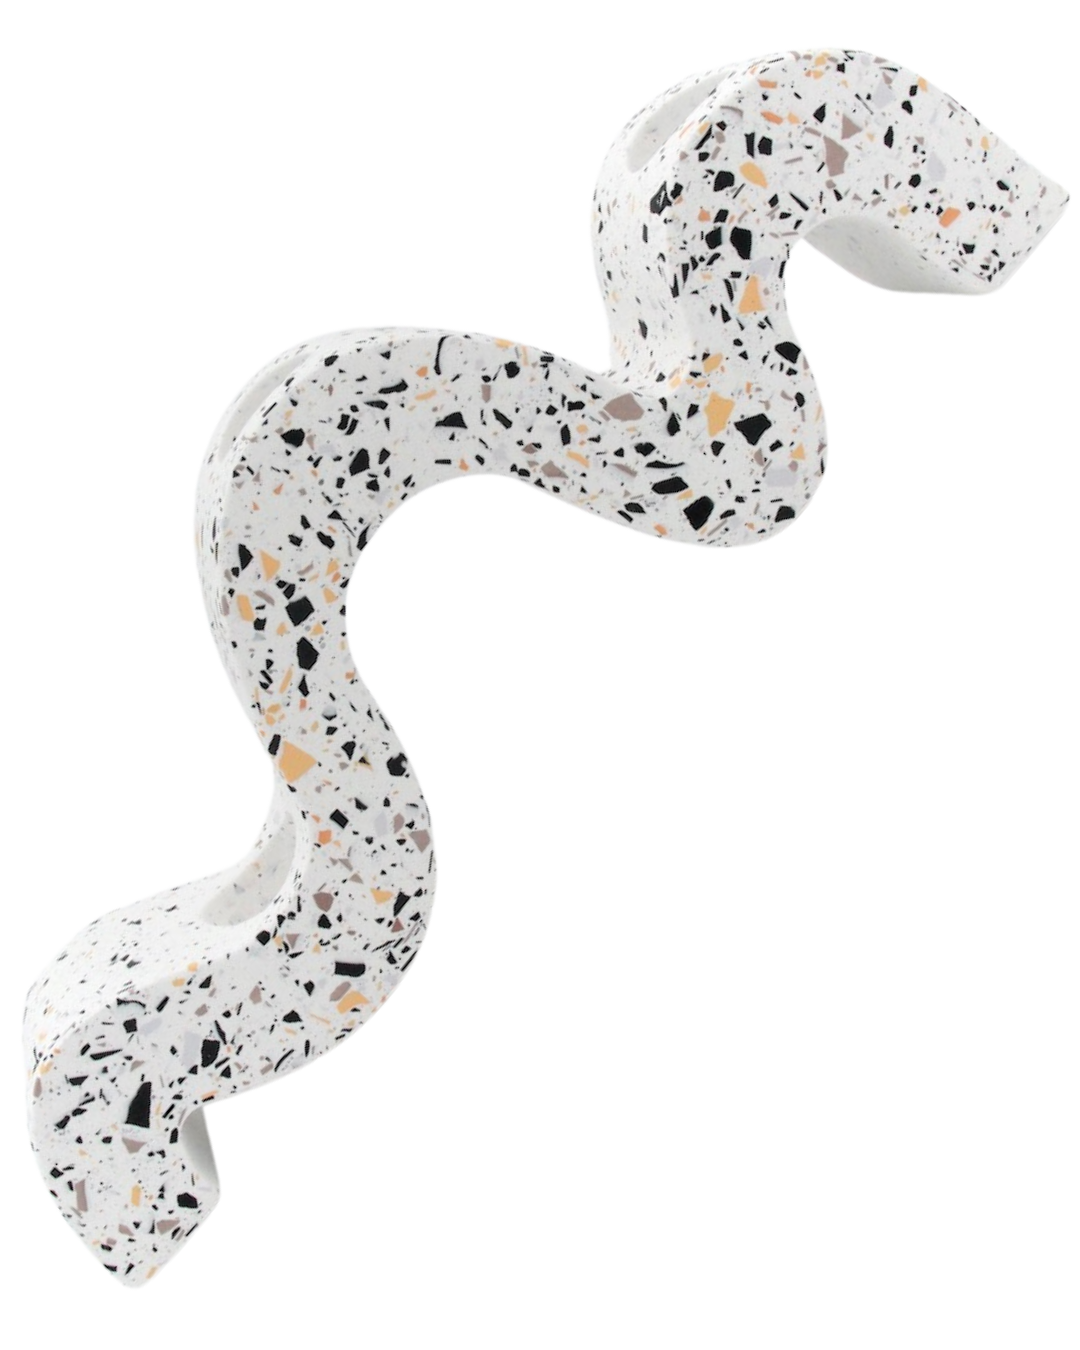 Wavy candlestick - With terrazzo